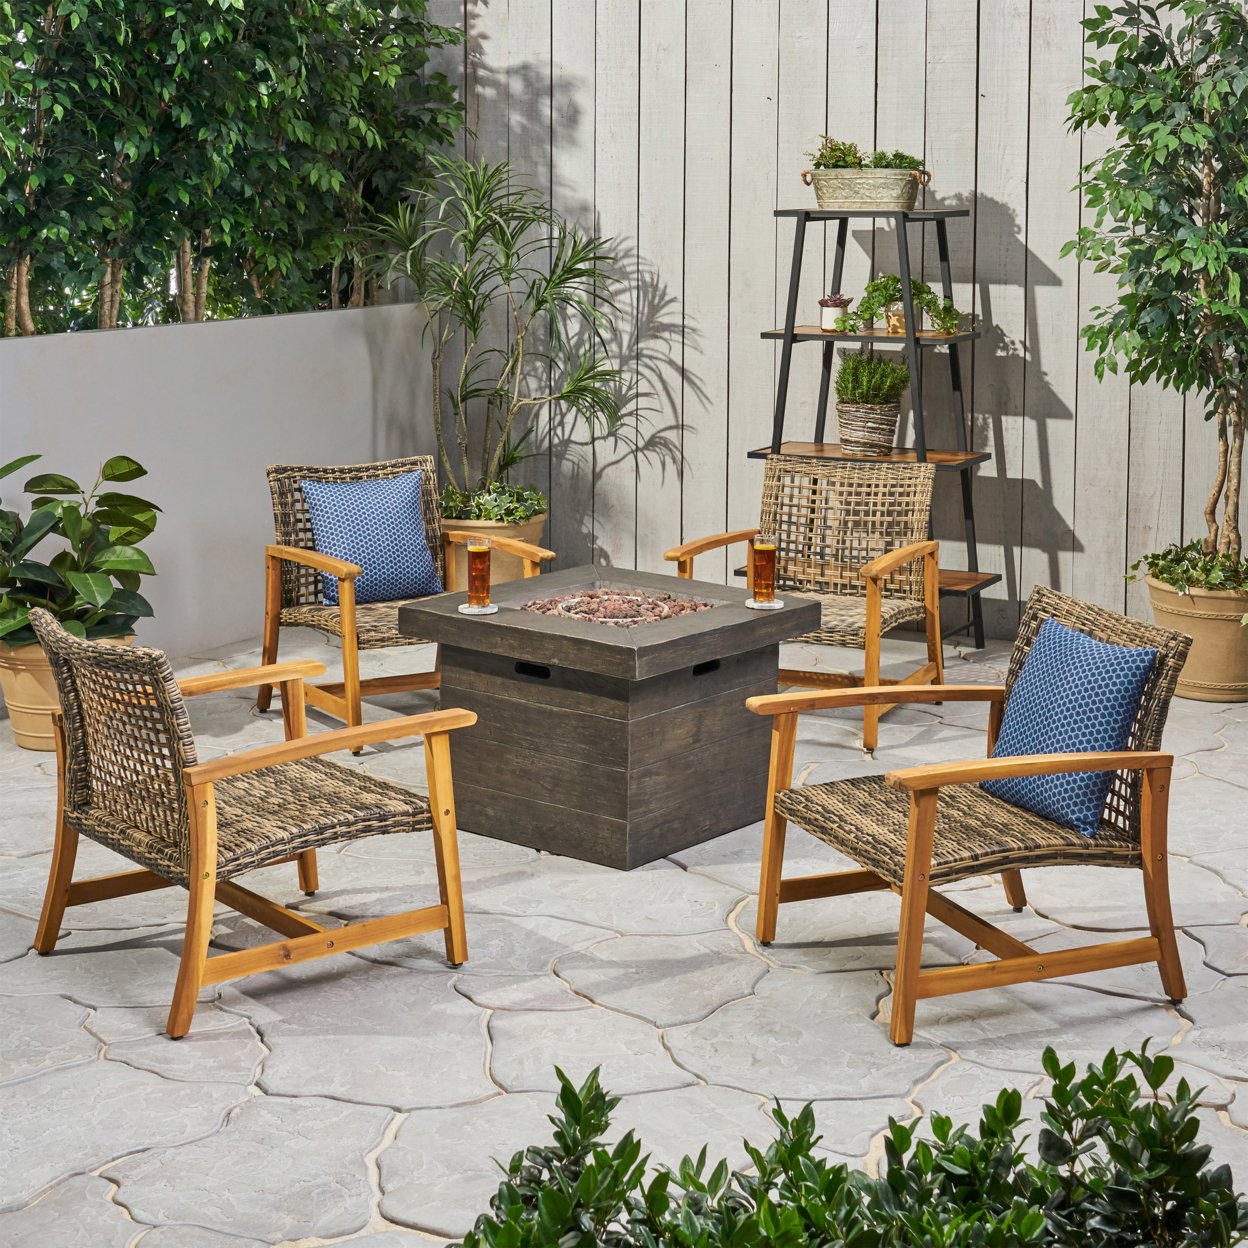 Eleanor Outdoor 5 Piece Wood And Wicker Club Chairs And Fire Pit Set - Mixed Black, Light Gray Washed Finish, Gray